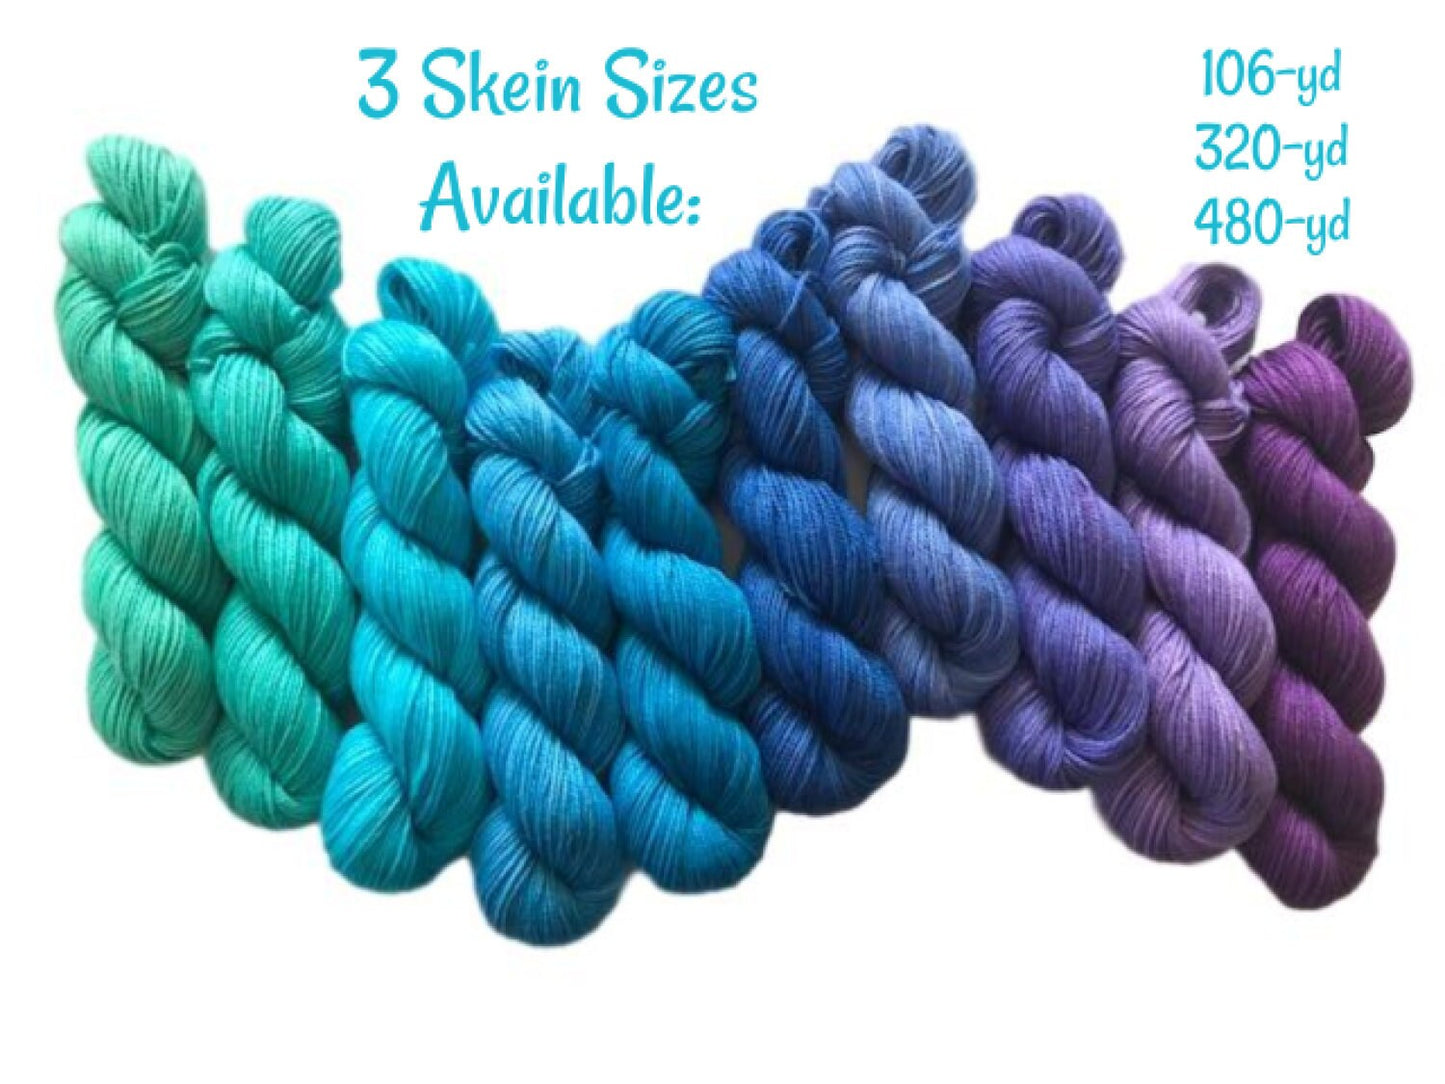 Hand Dyed Vegan Yarn Kit - Fingering / Sock Weight Bamboo Cotton - Teal Blue Purple Gradient - Semi Solid Crochet and Knitting Thread 3 Ply